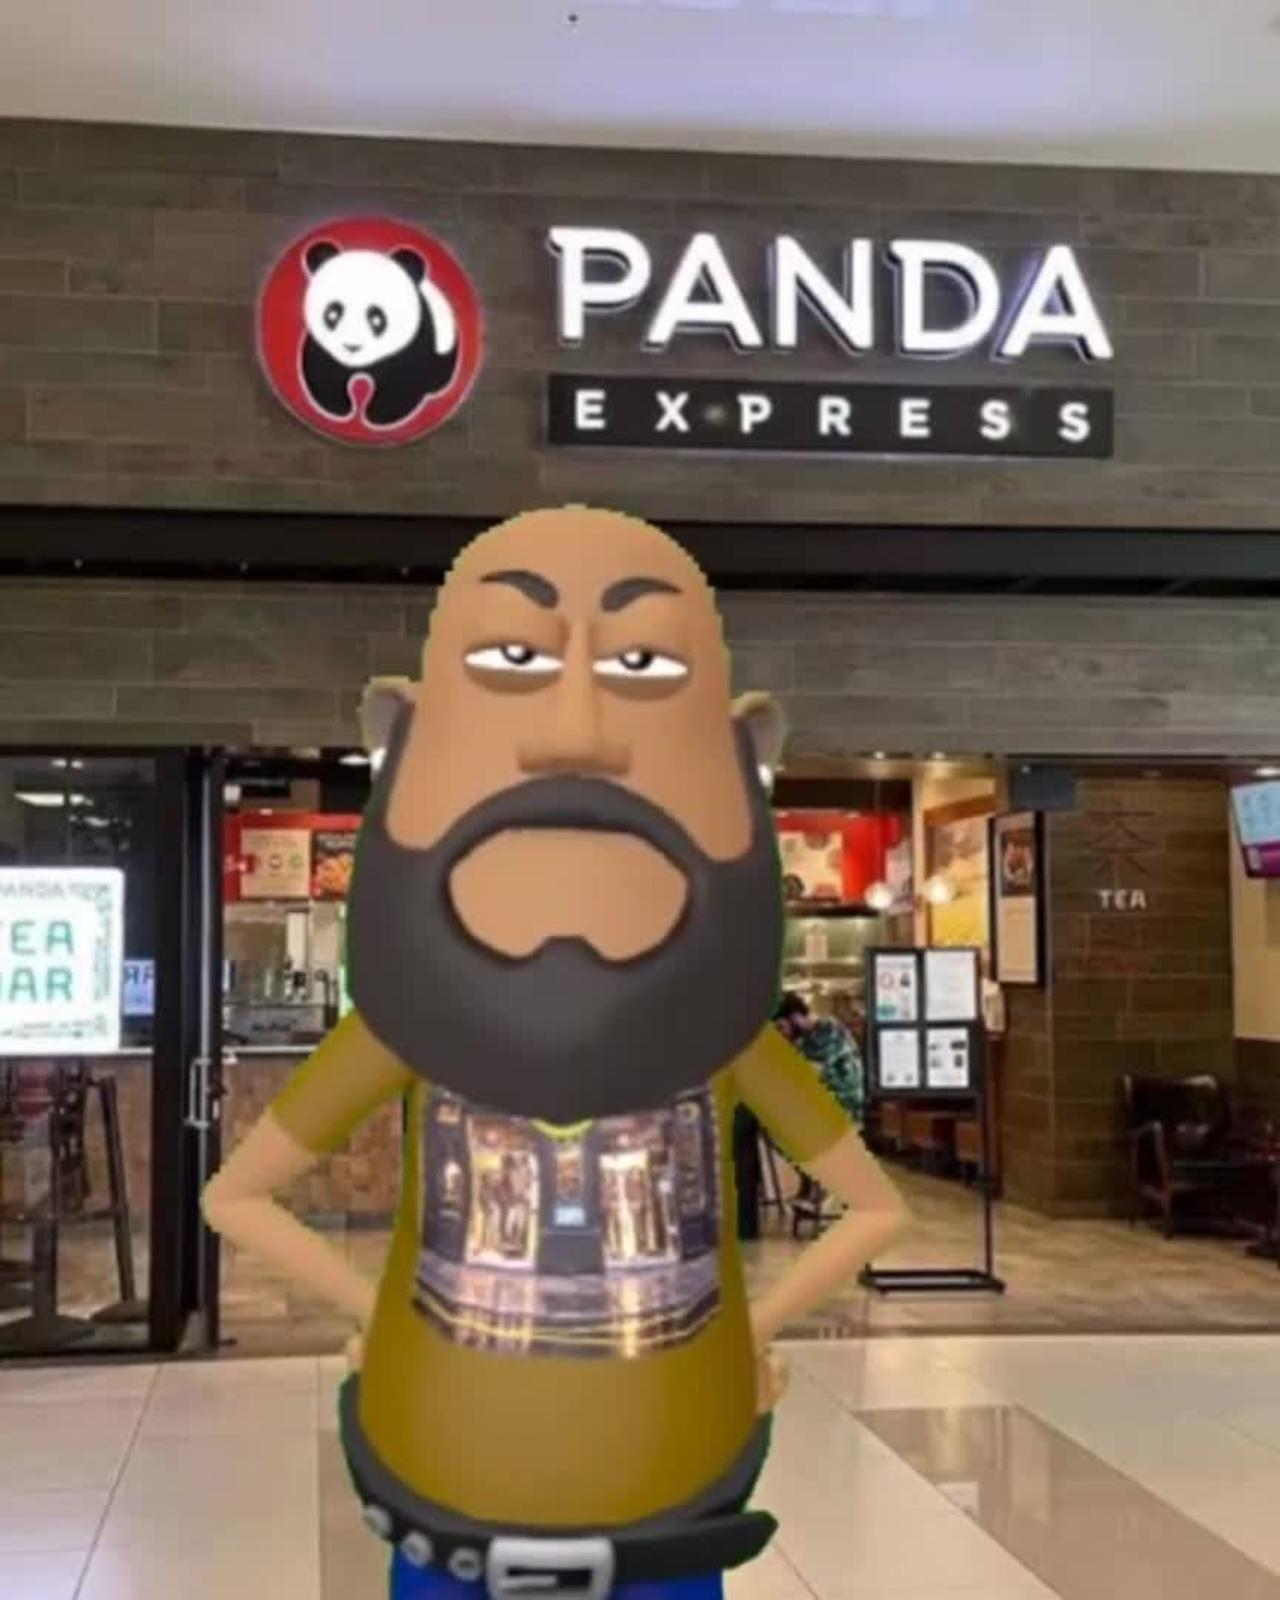 Funny Cartoon Animation About Daym Drops & Panda Express 😁